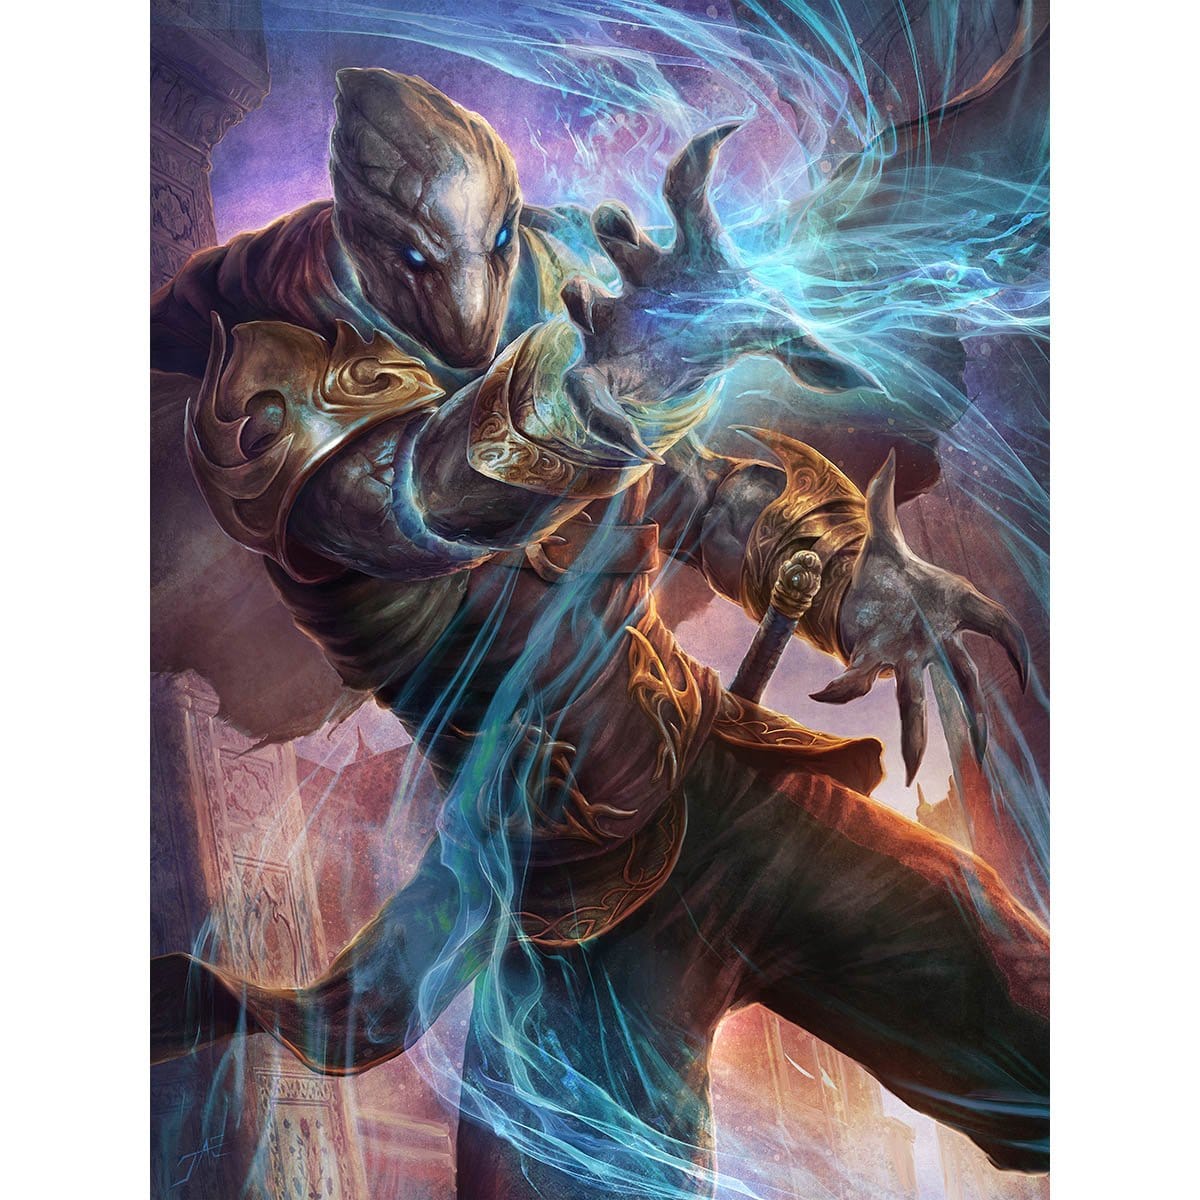 Yahenni's Expertise Print - Print - Original Magic Art - Accessories for Magic the Gathering and other card games